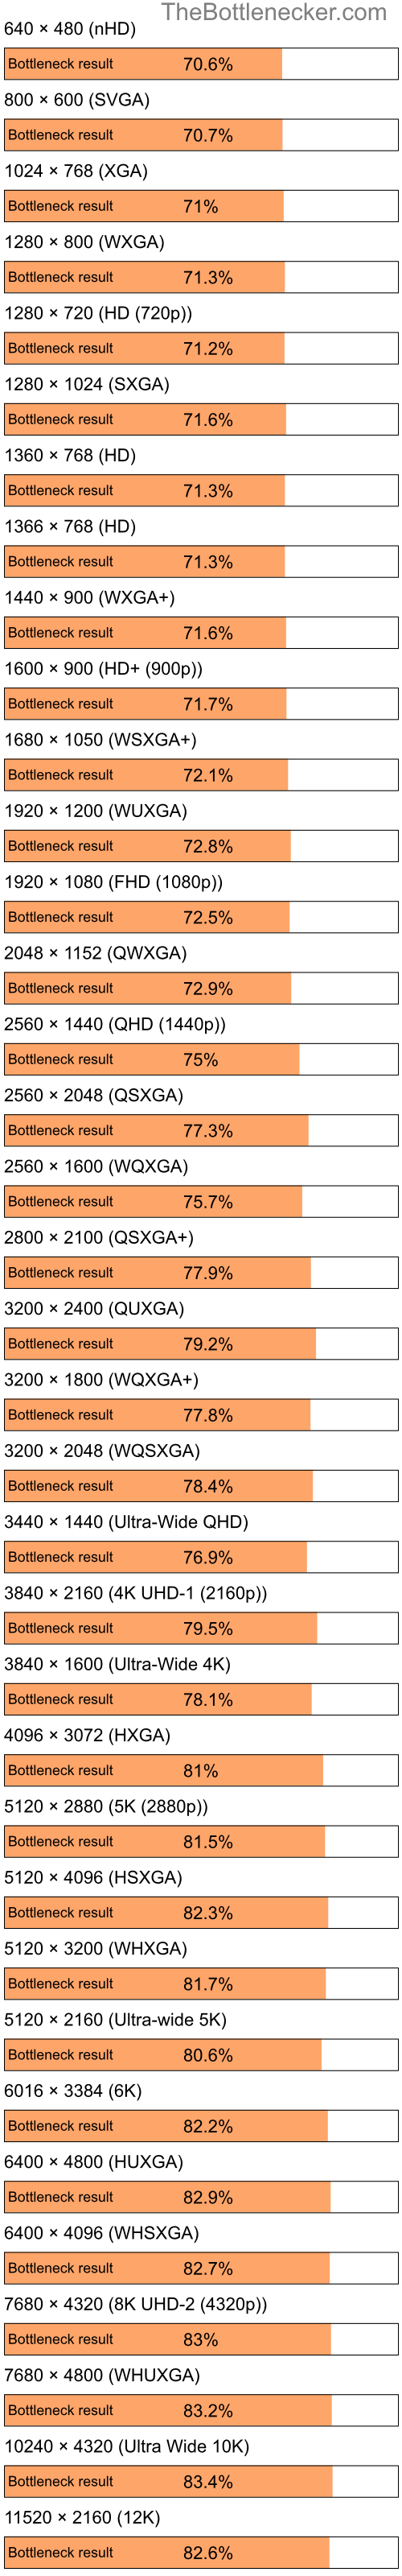 Bottleneck results by resolution for Intel Celeron M and AMD M880G with Mobility Radeon HD 4200 in Graphic Card Intense Tasks